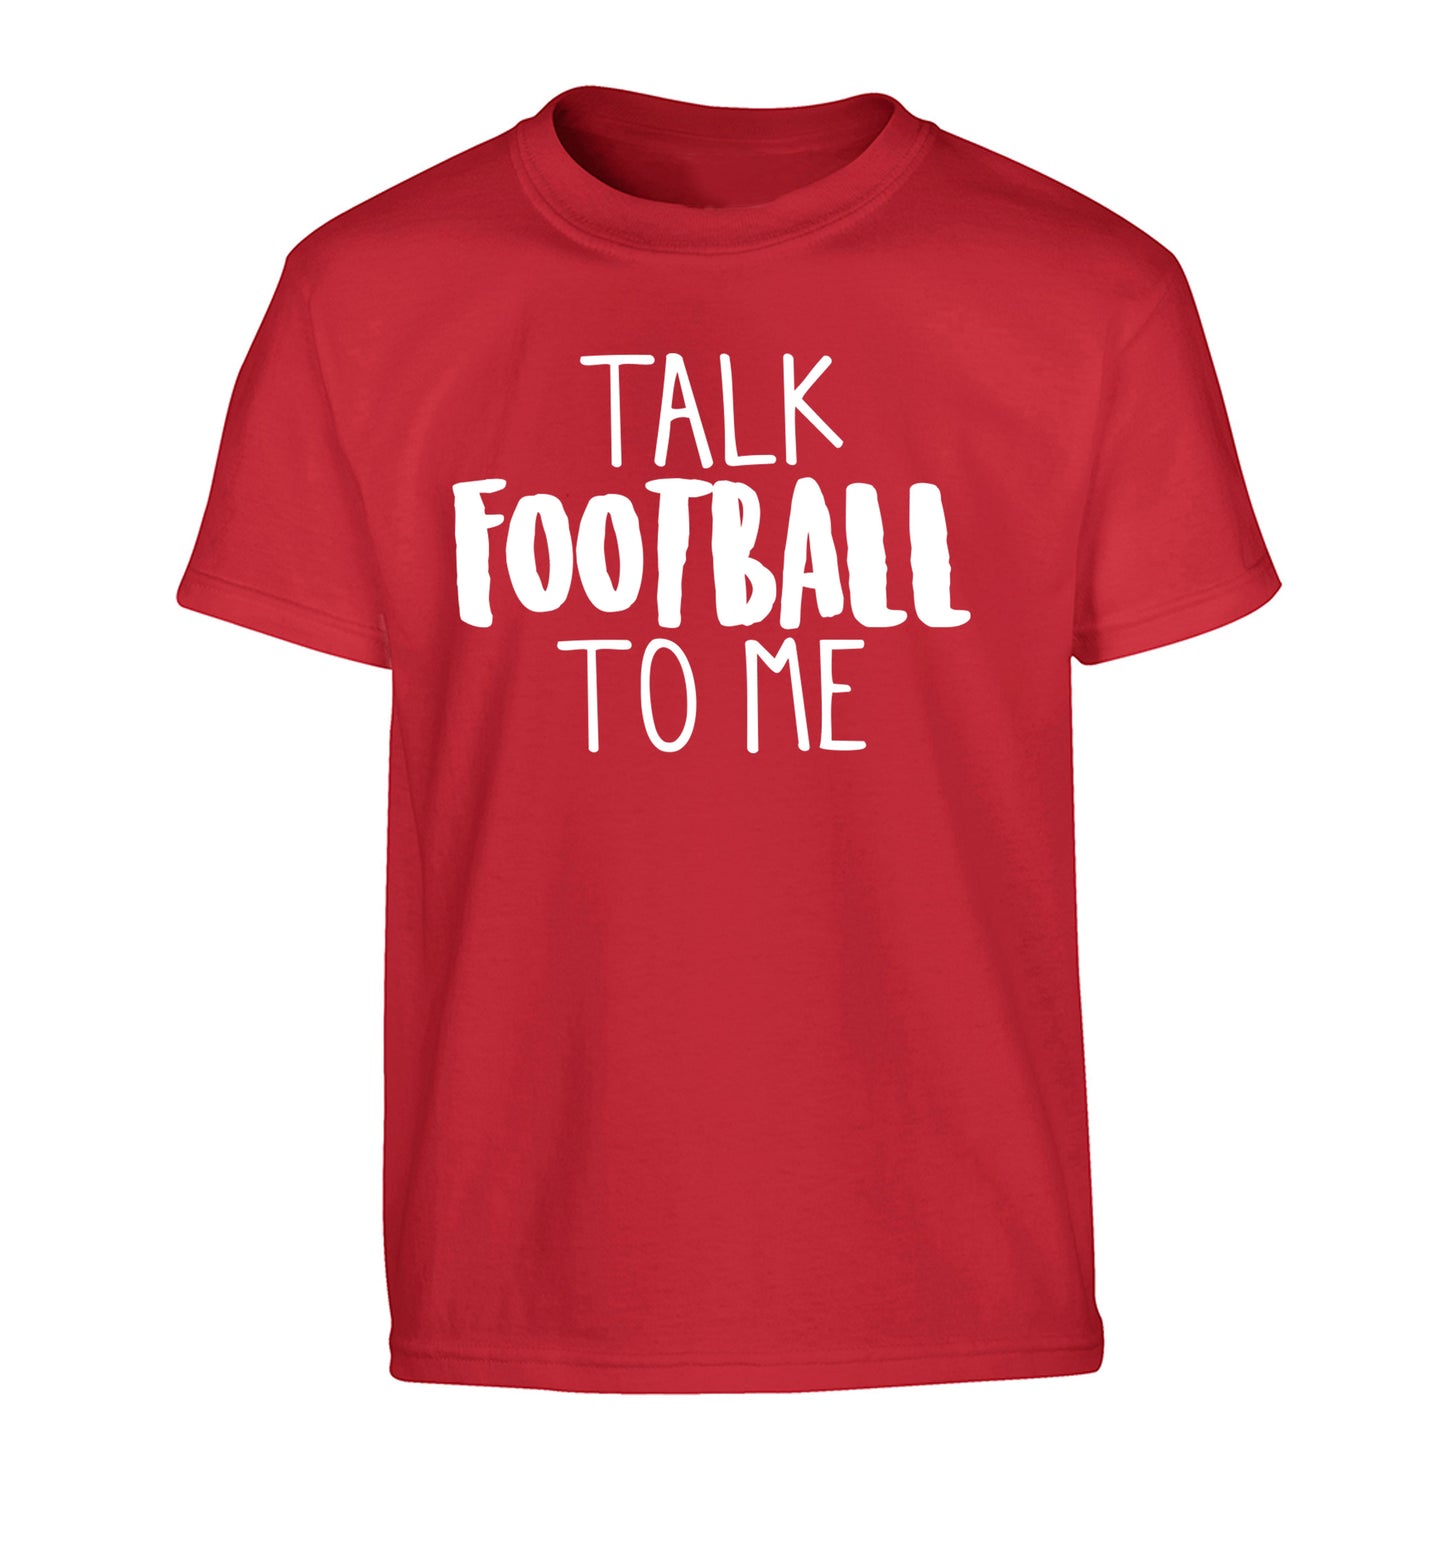 Talk football to me Children's red Tshirt 12-14 Years